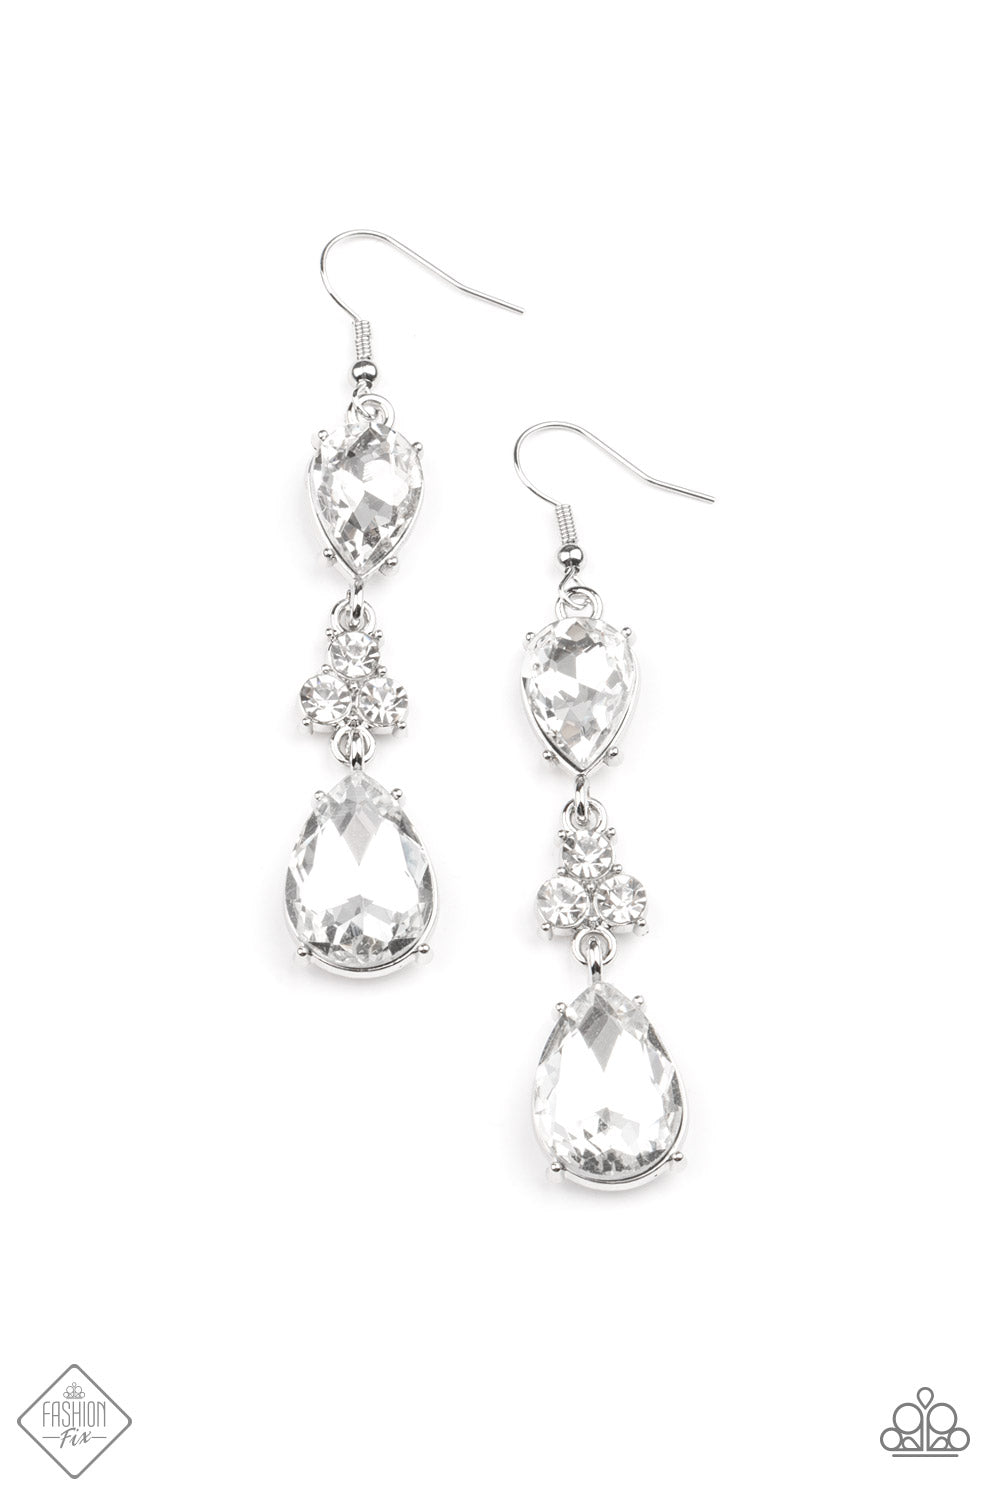 Once Upon a Twinkle White Earrings - Paparazzi